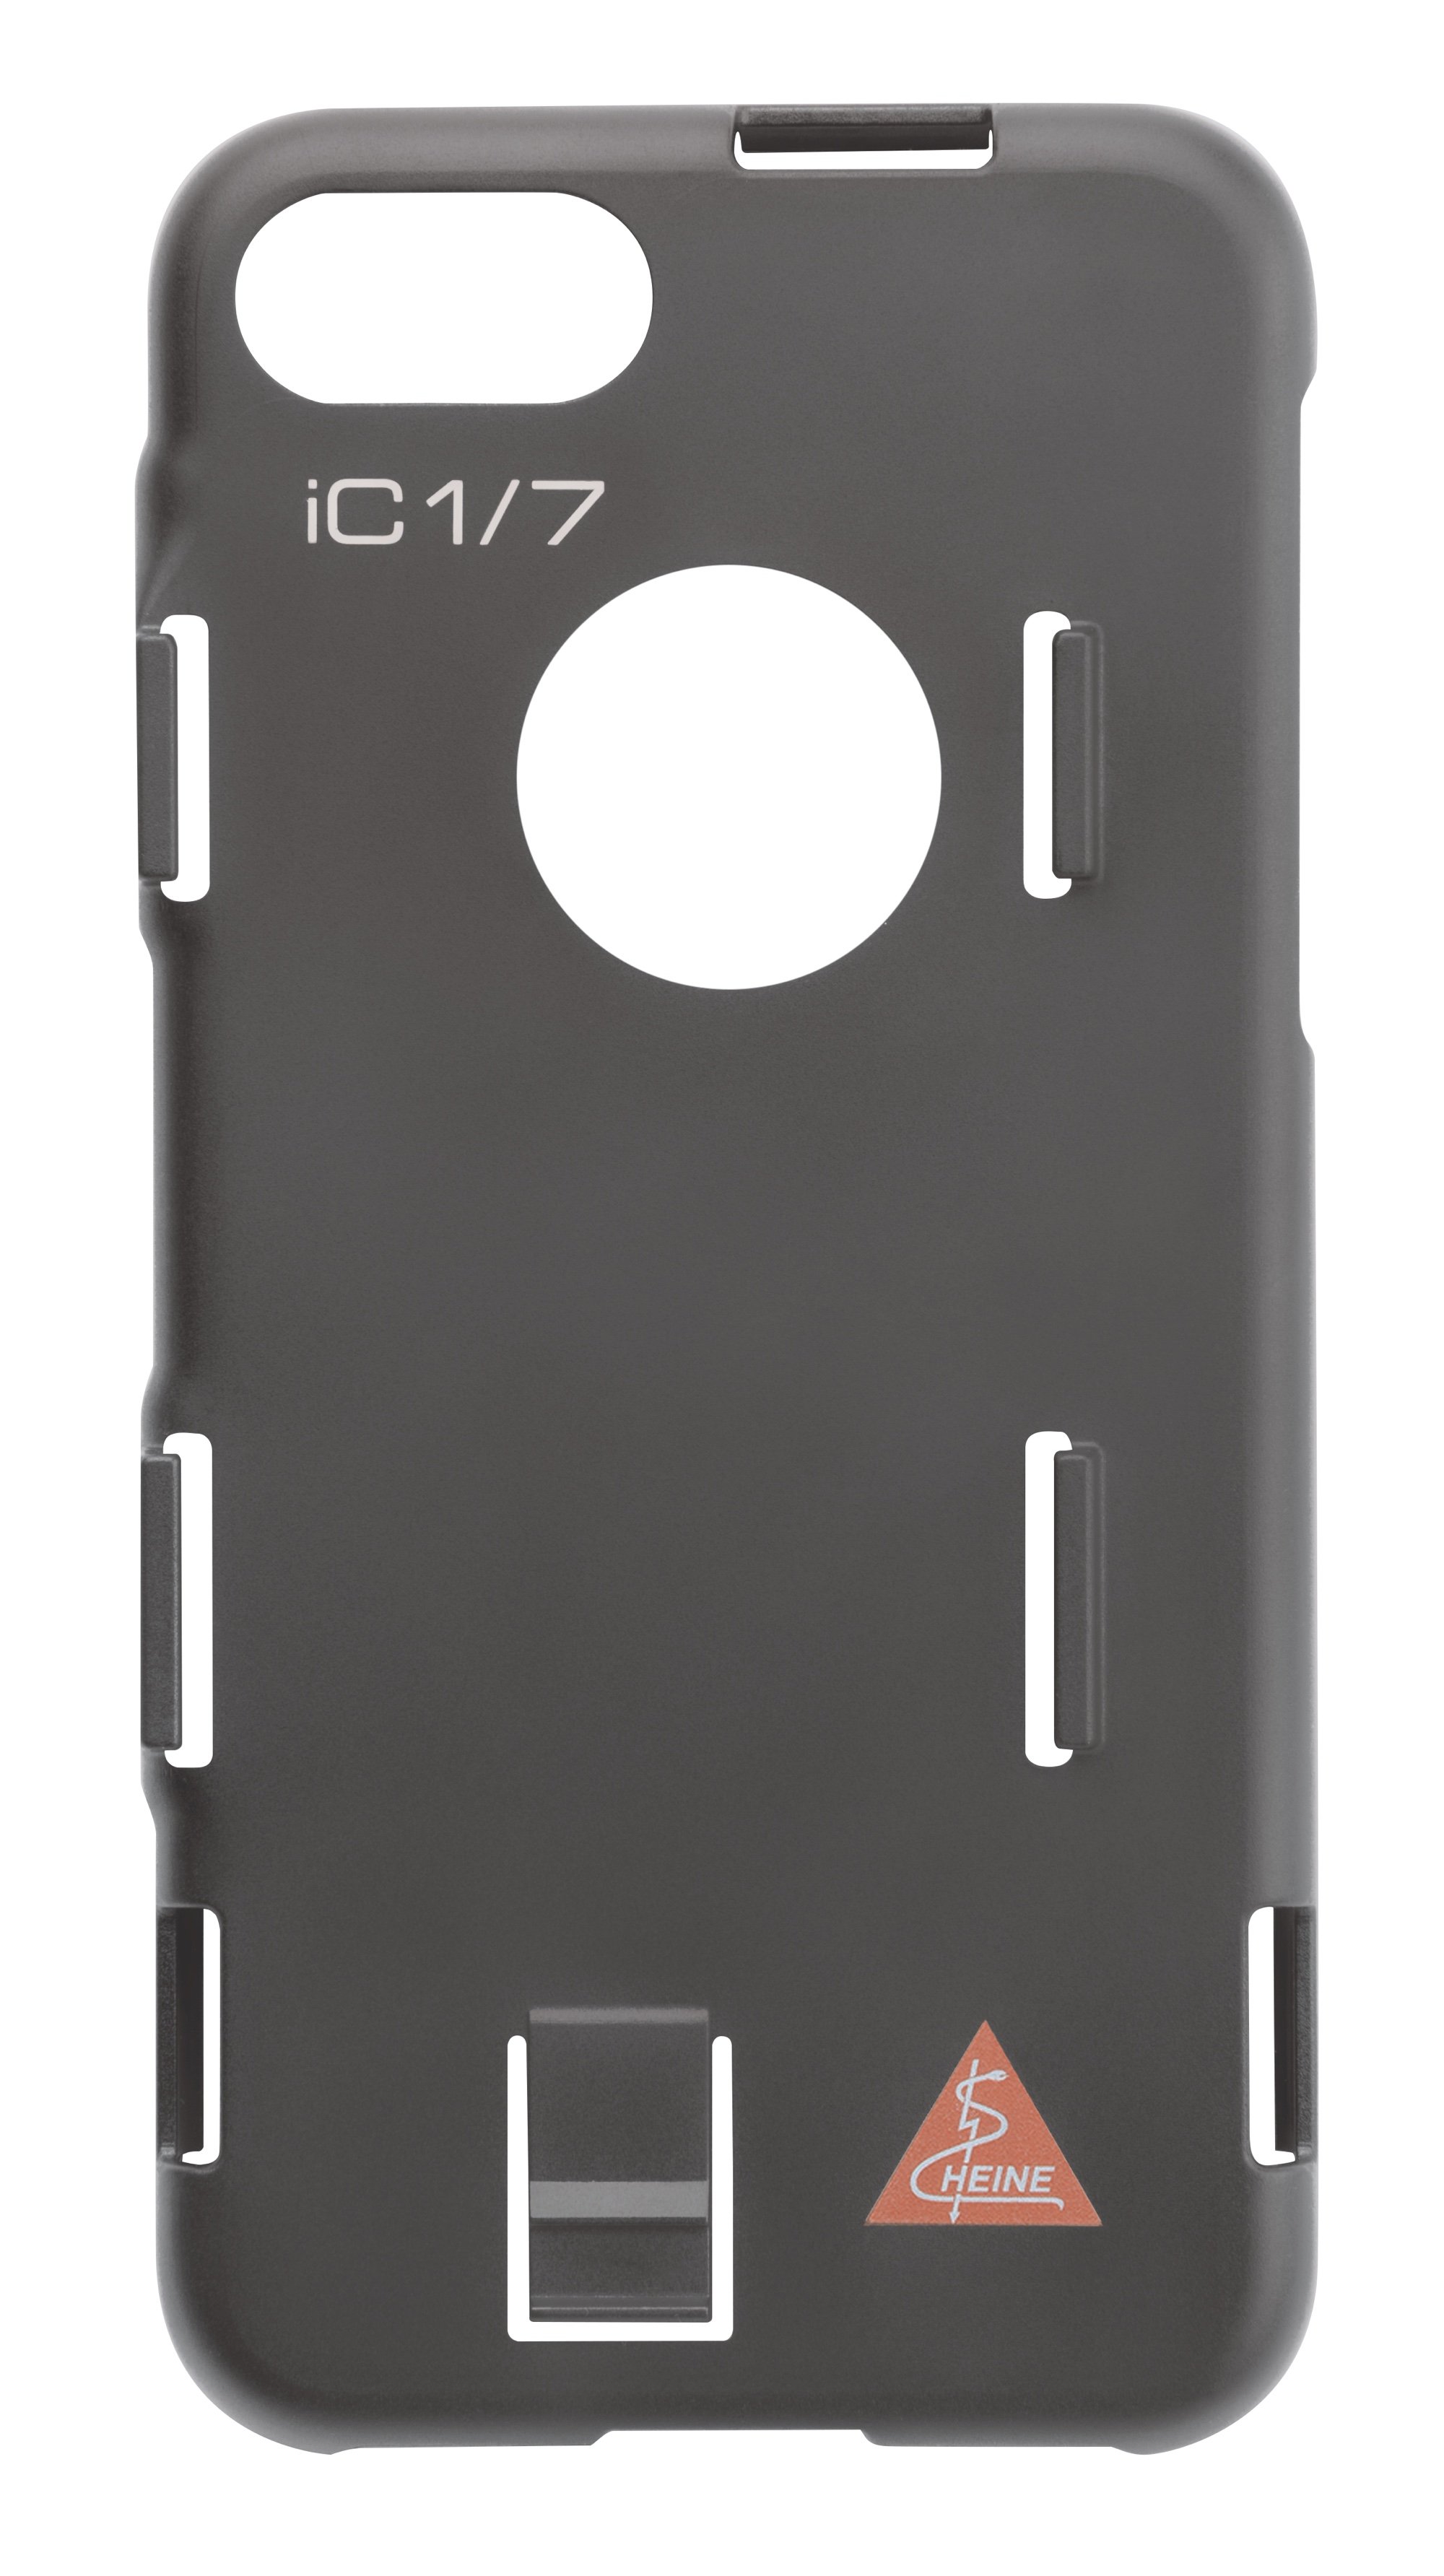 HEINE iC 1 Mounting Case for iPhone 7/8